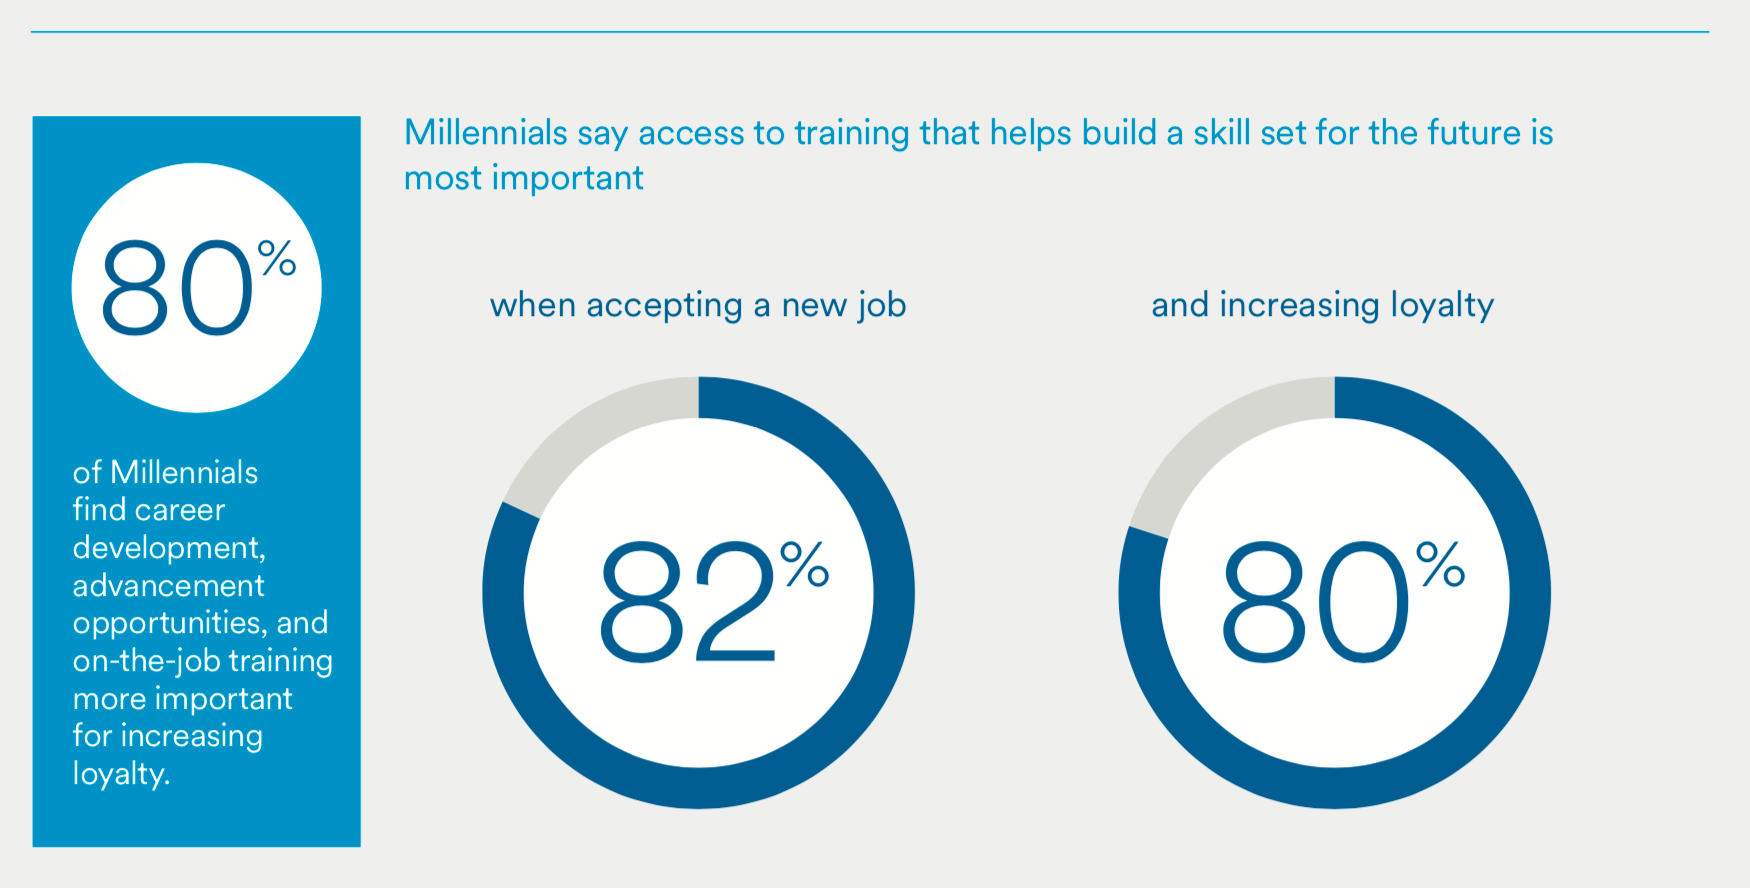 80% of millennials say access to training that helps build a skill set for the future is most important